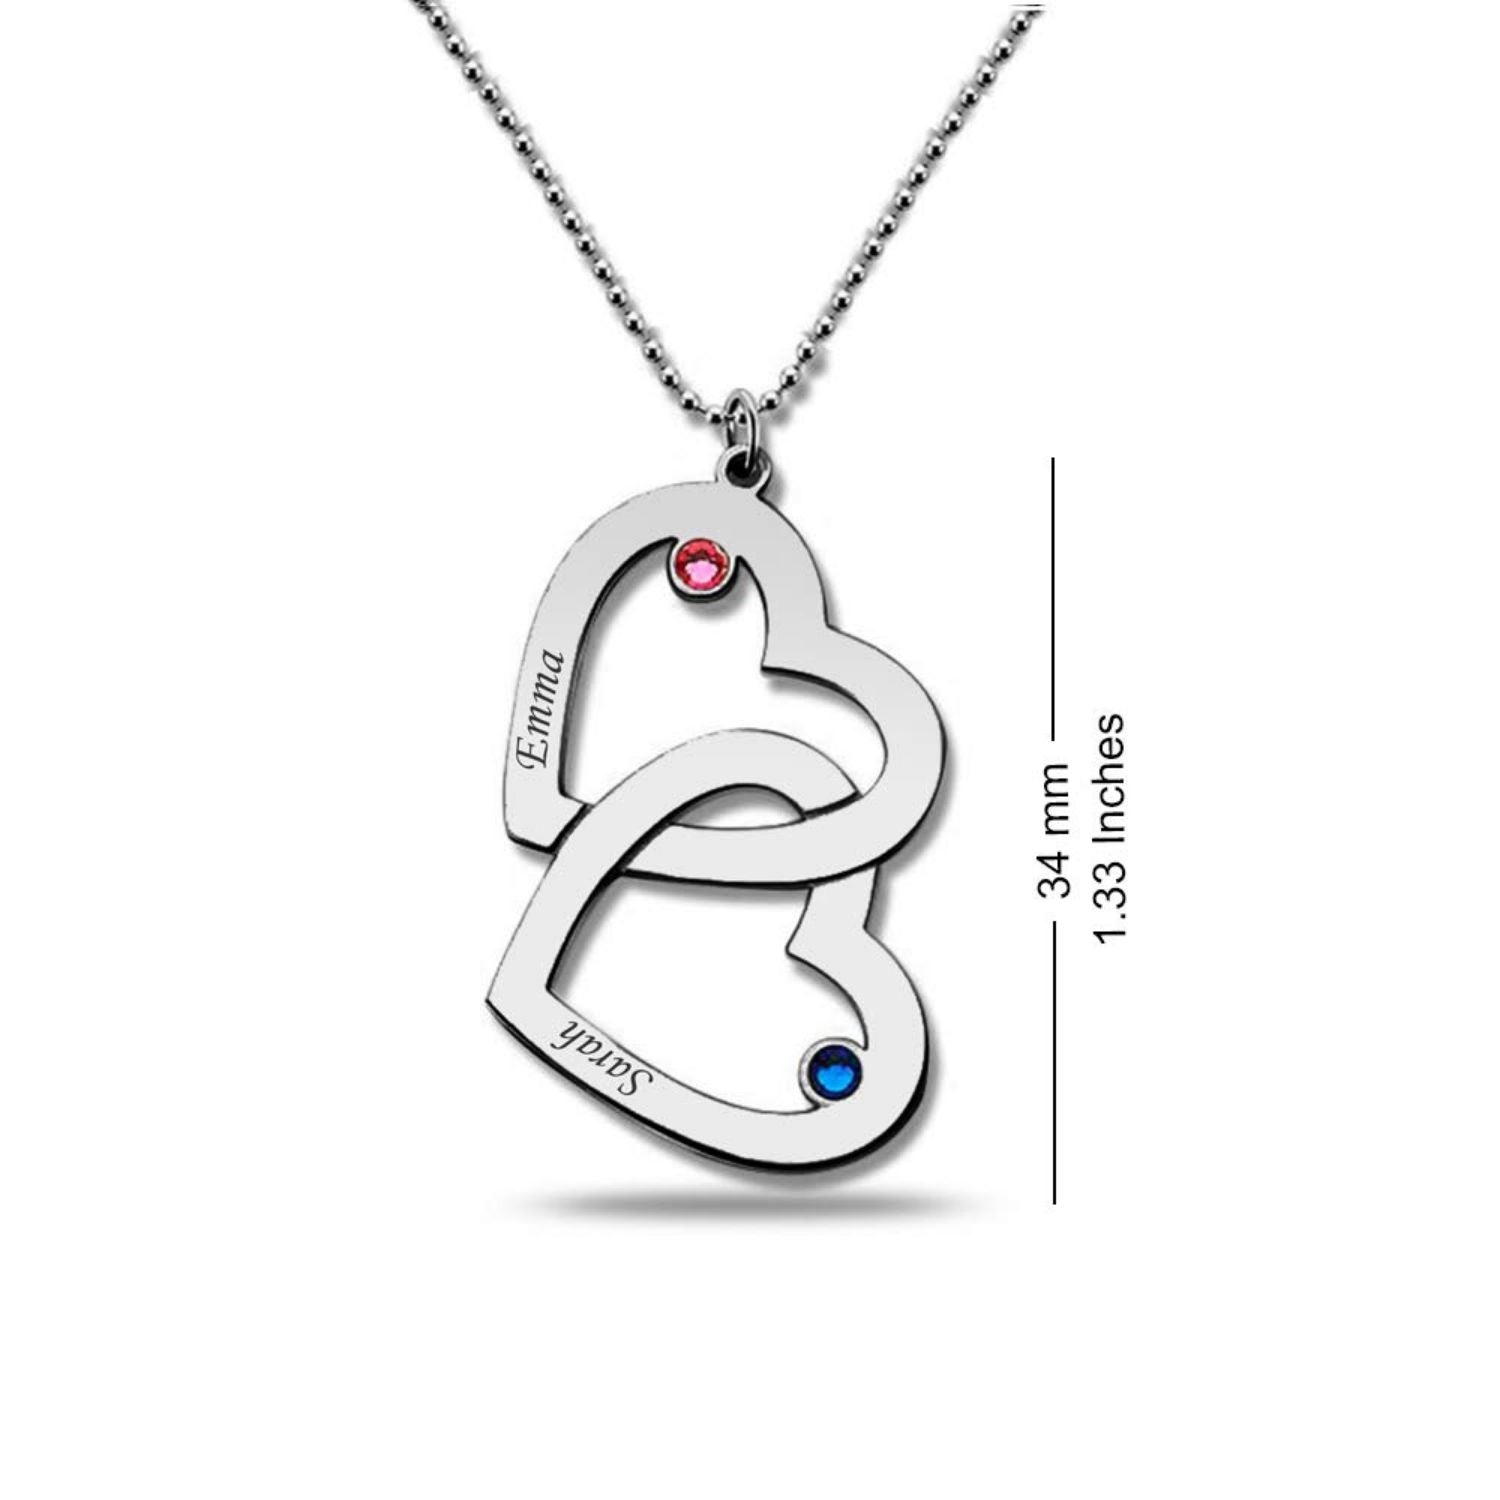 Personalised 925 Sterling Silver Interlocking Heart Birthstone Couple Necklace for Teen Women